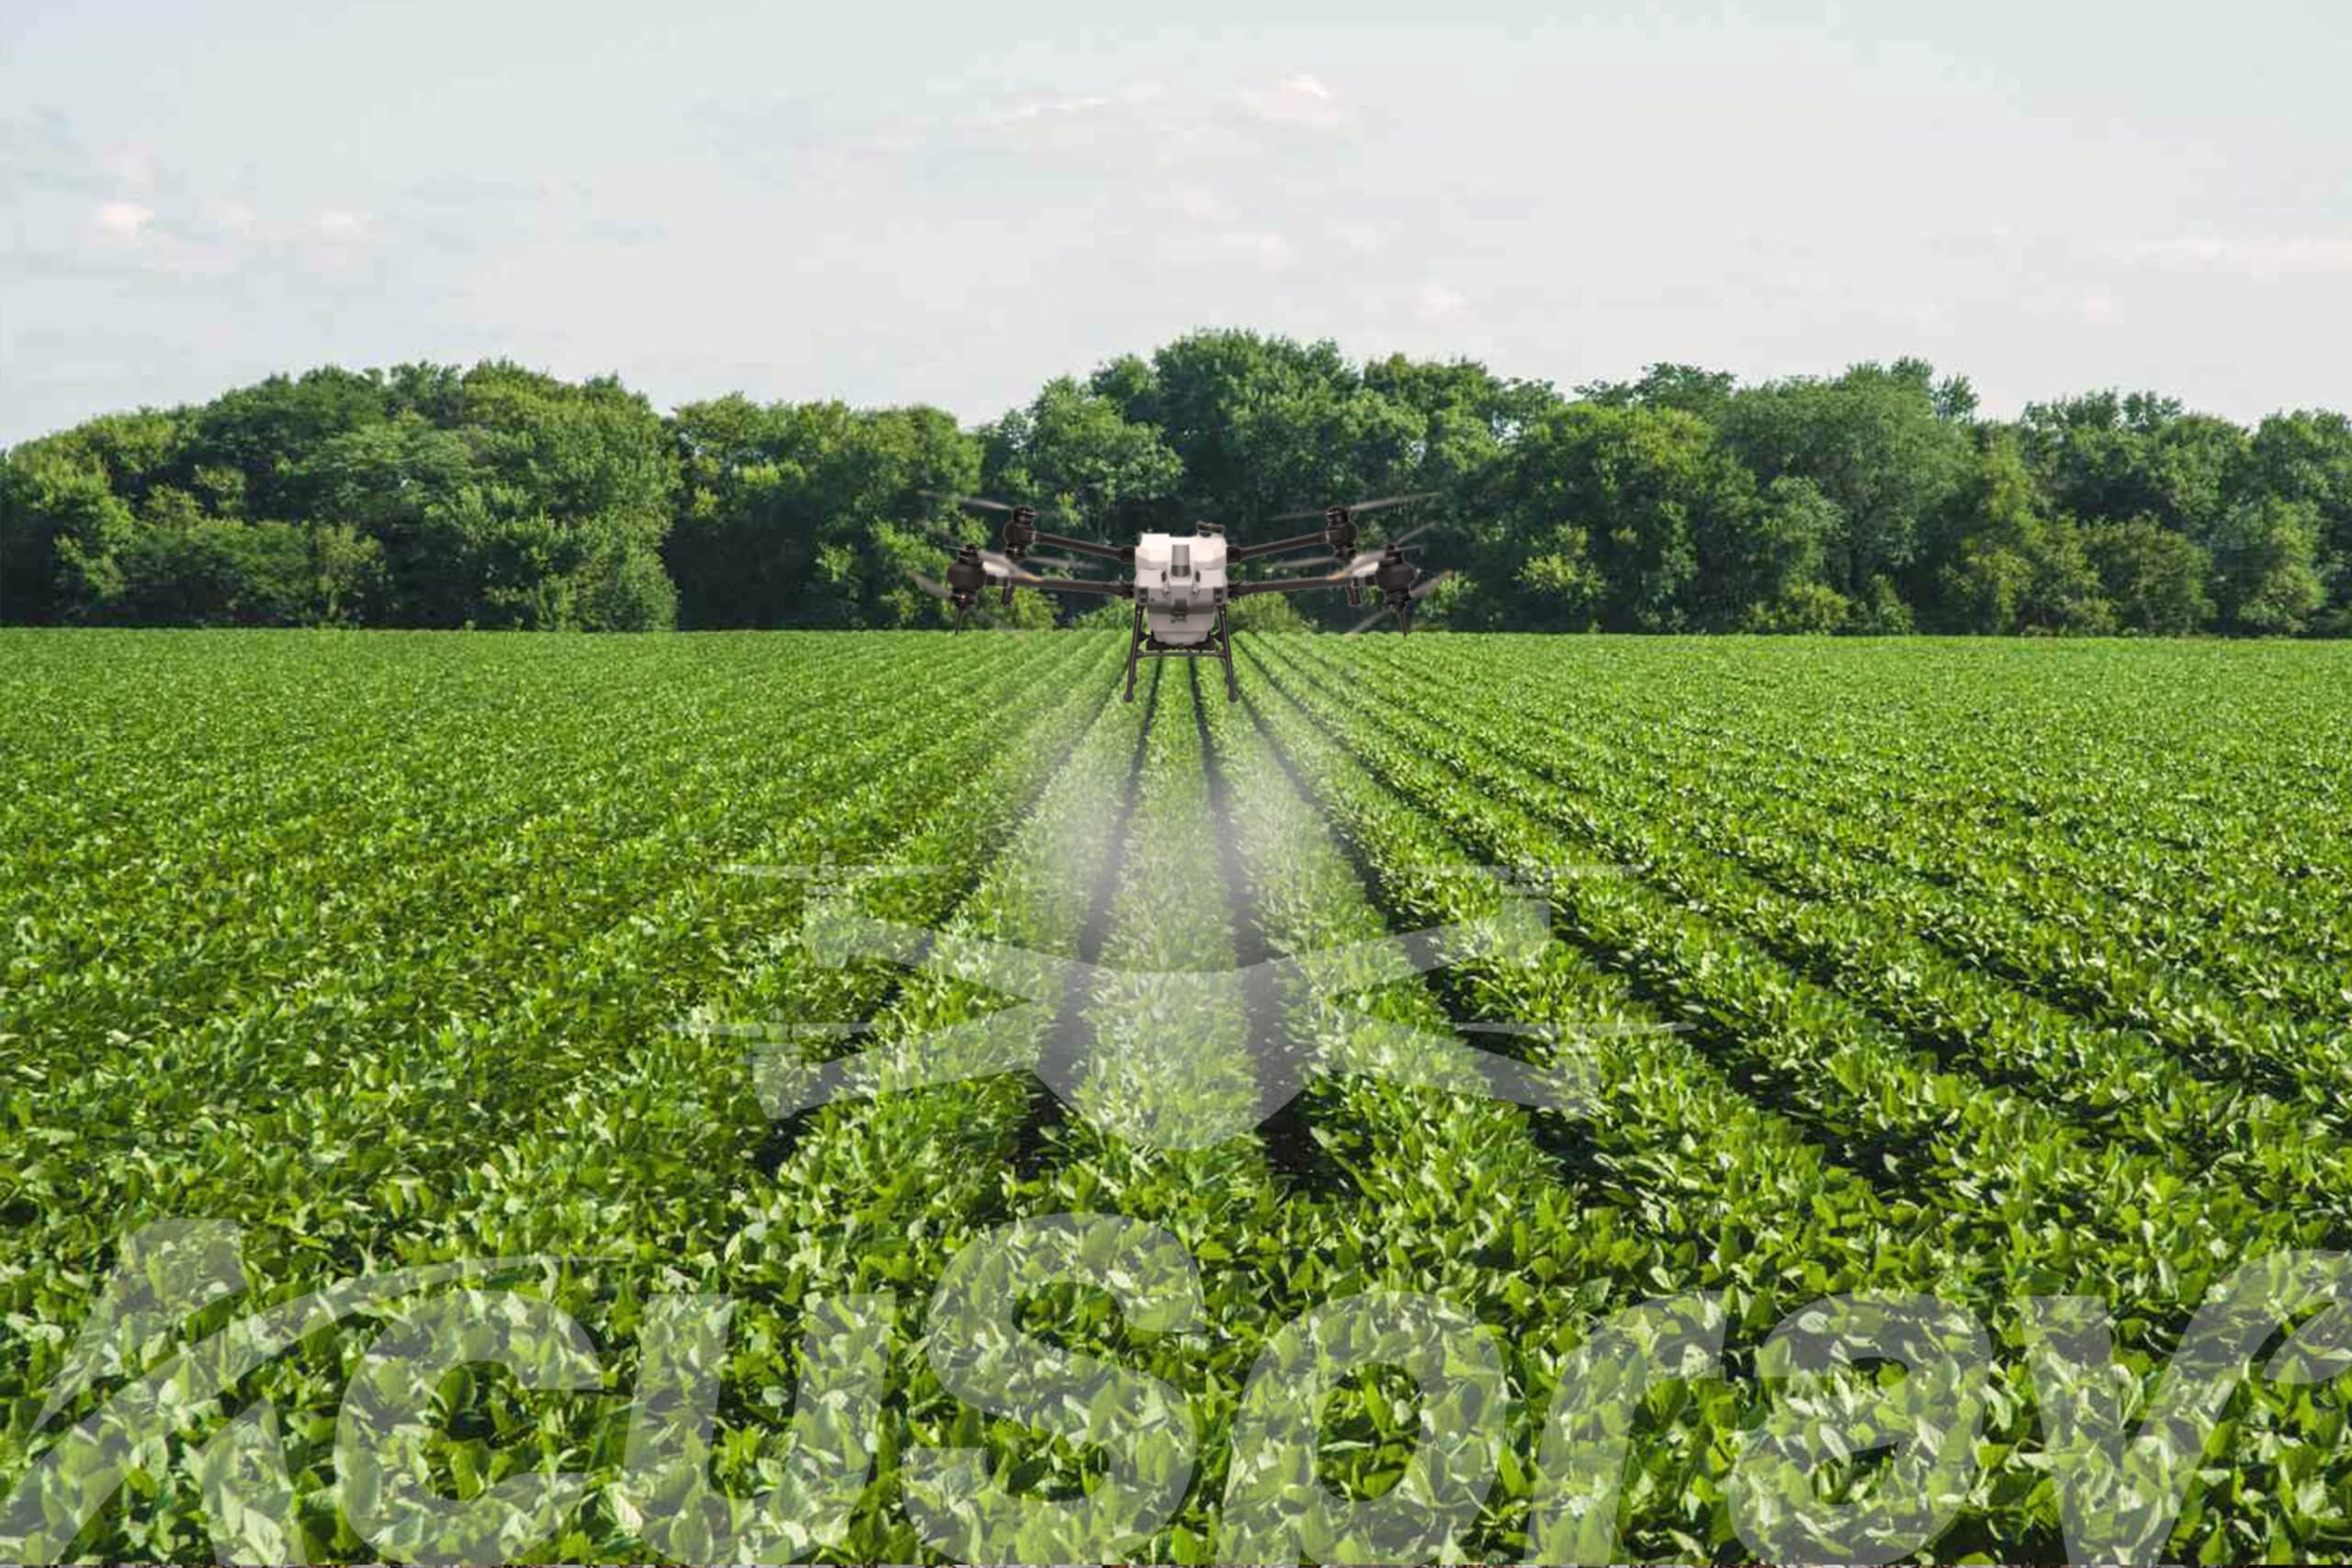 Spray drone hovering over lush soybean fields